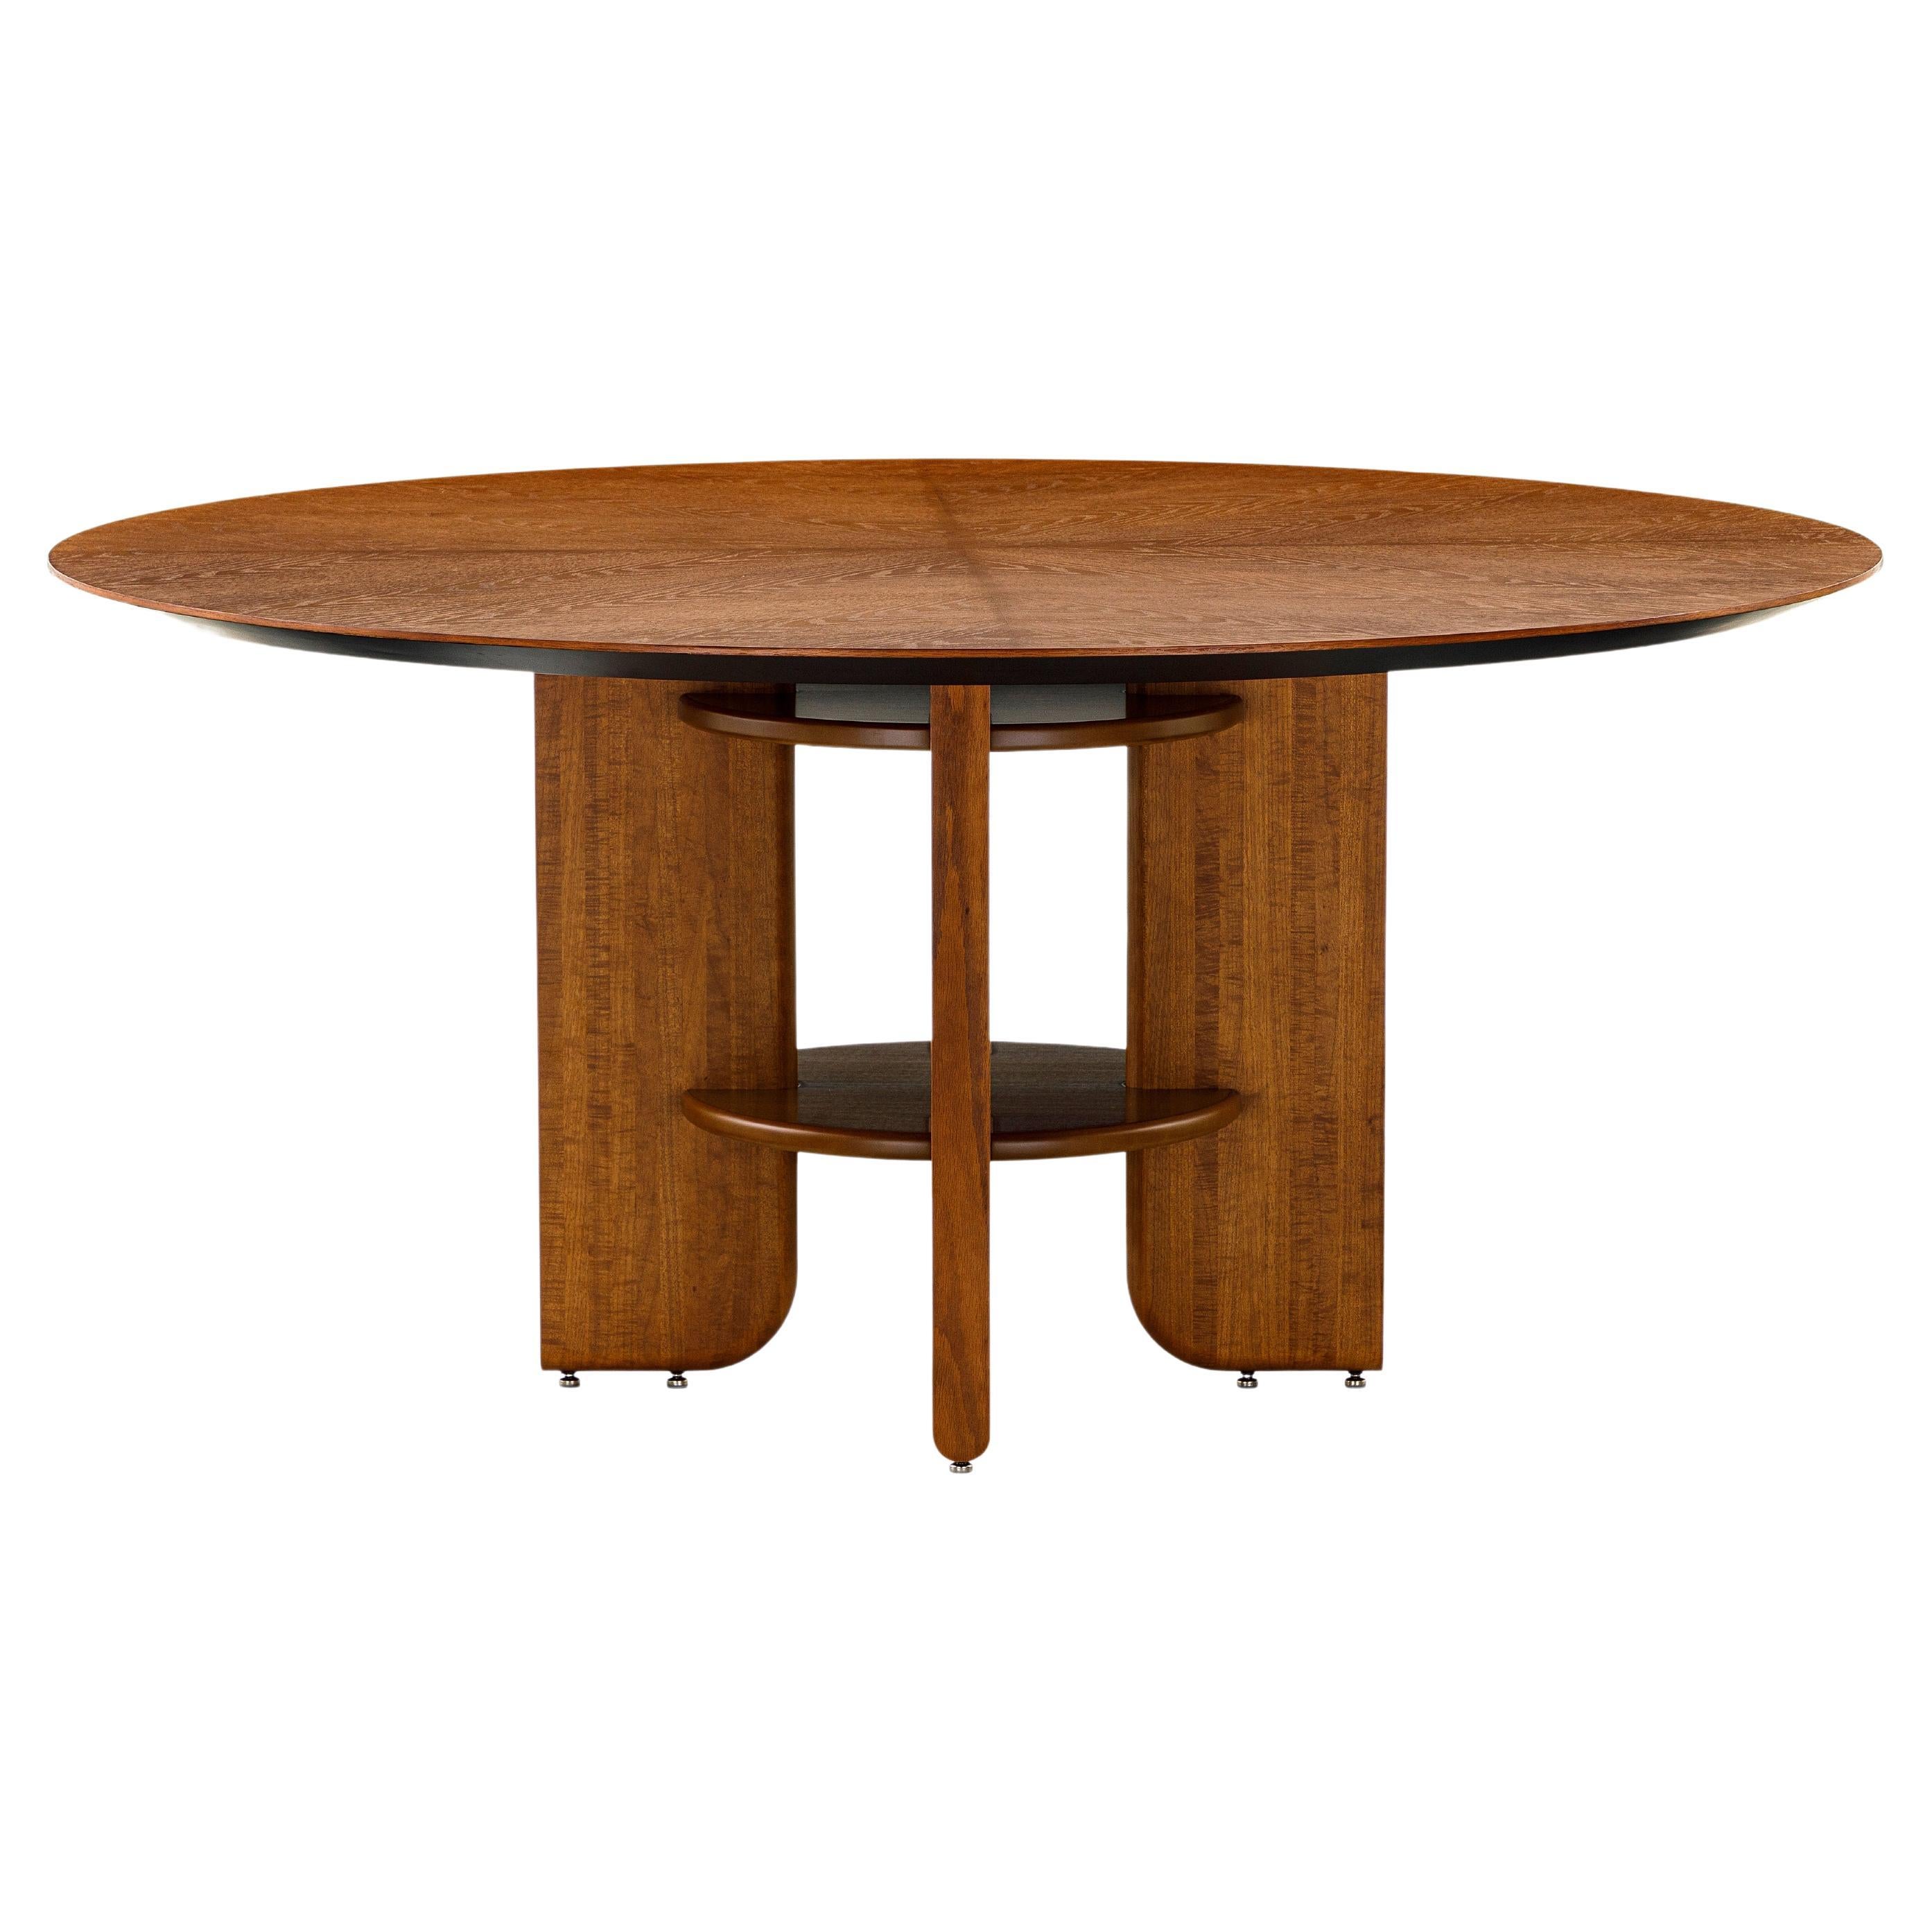 Moon Round Dining Table with Almond Oak Veneered Top and Wood Legs 63'' For Sale